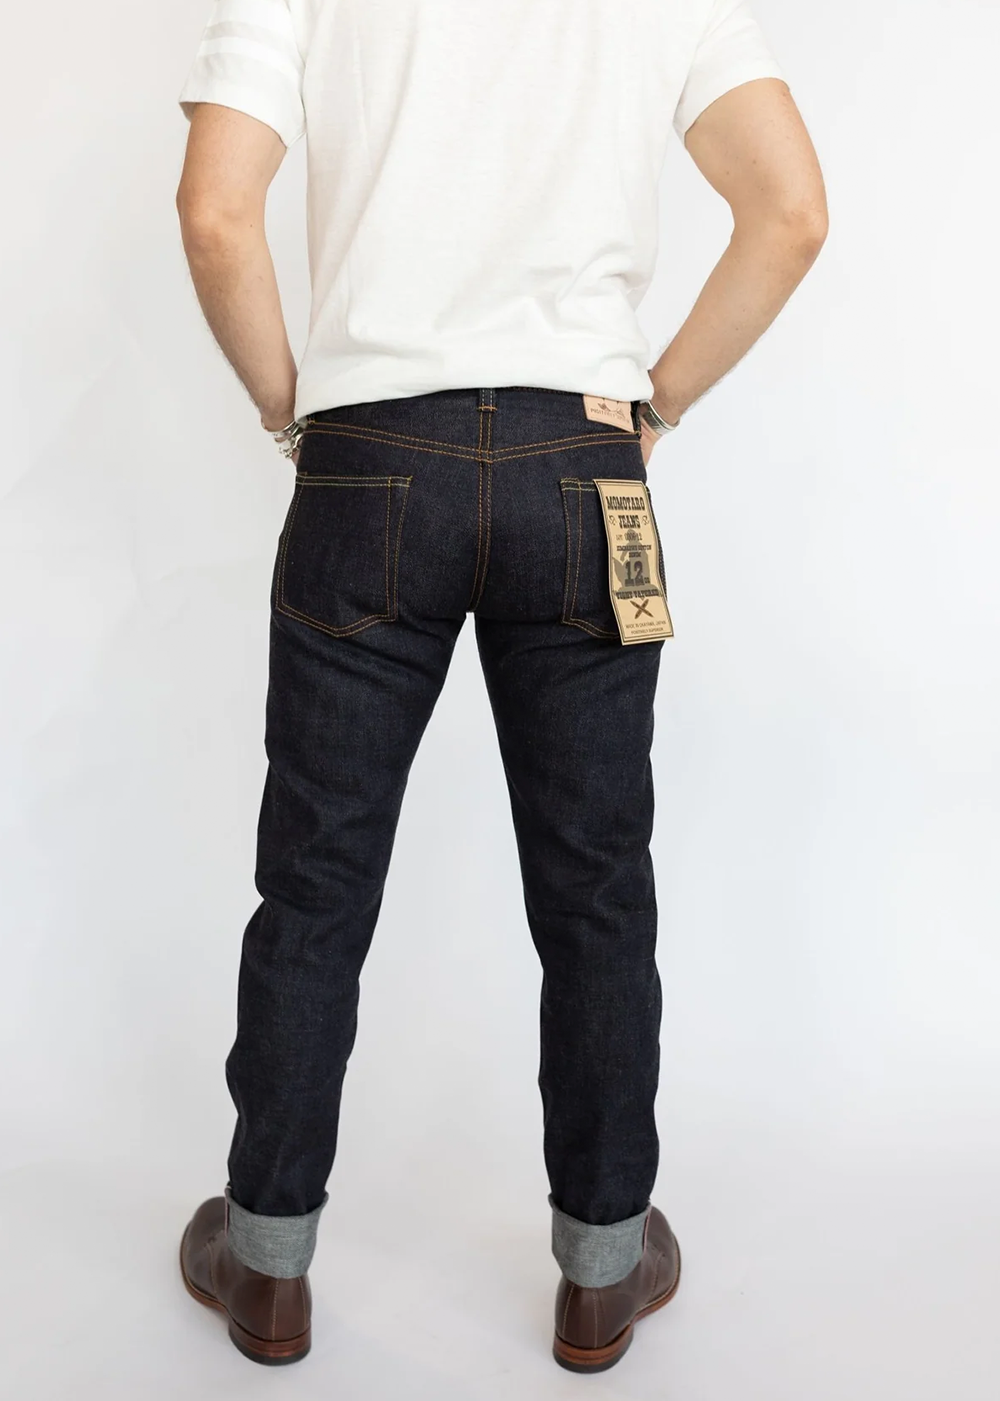 12 oz Tight Tapered Jeans